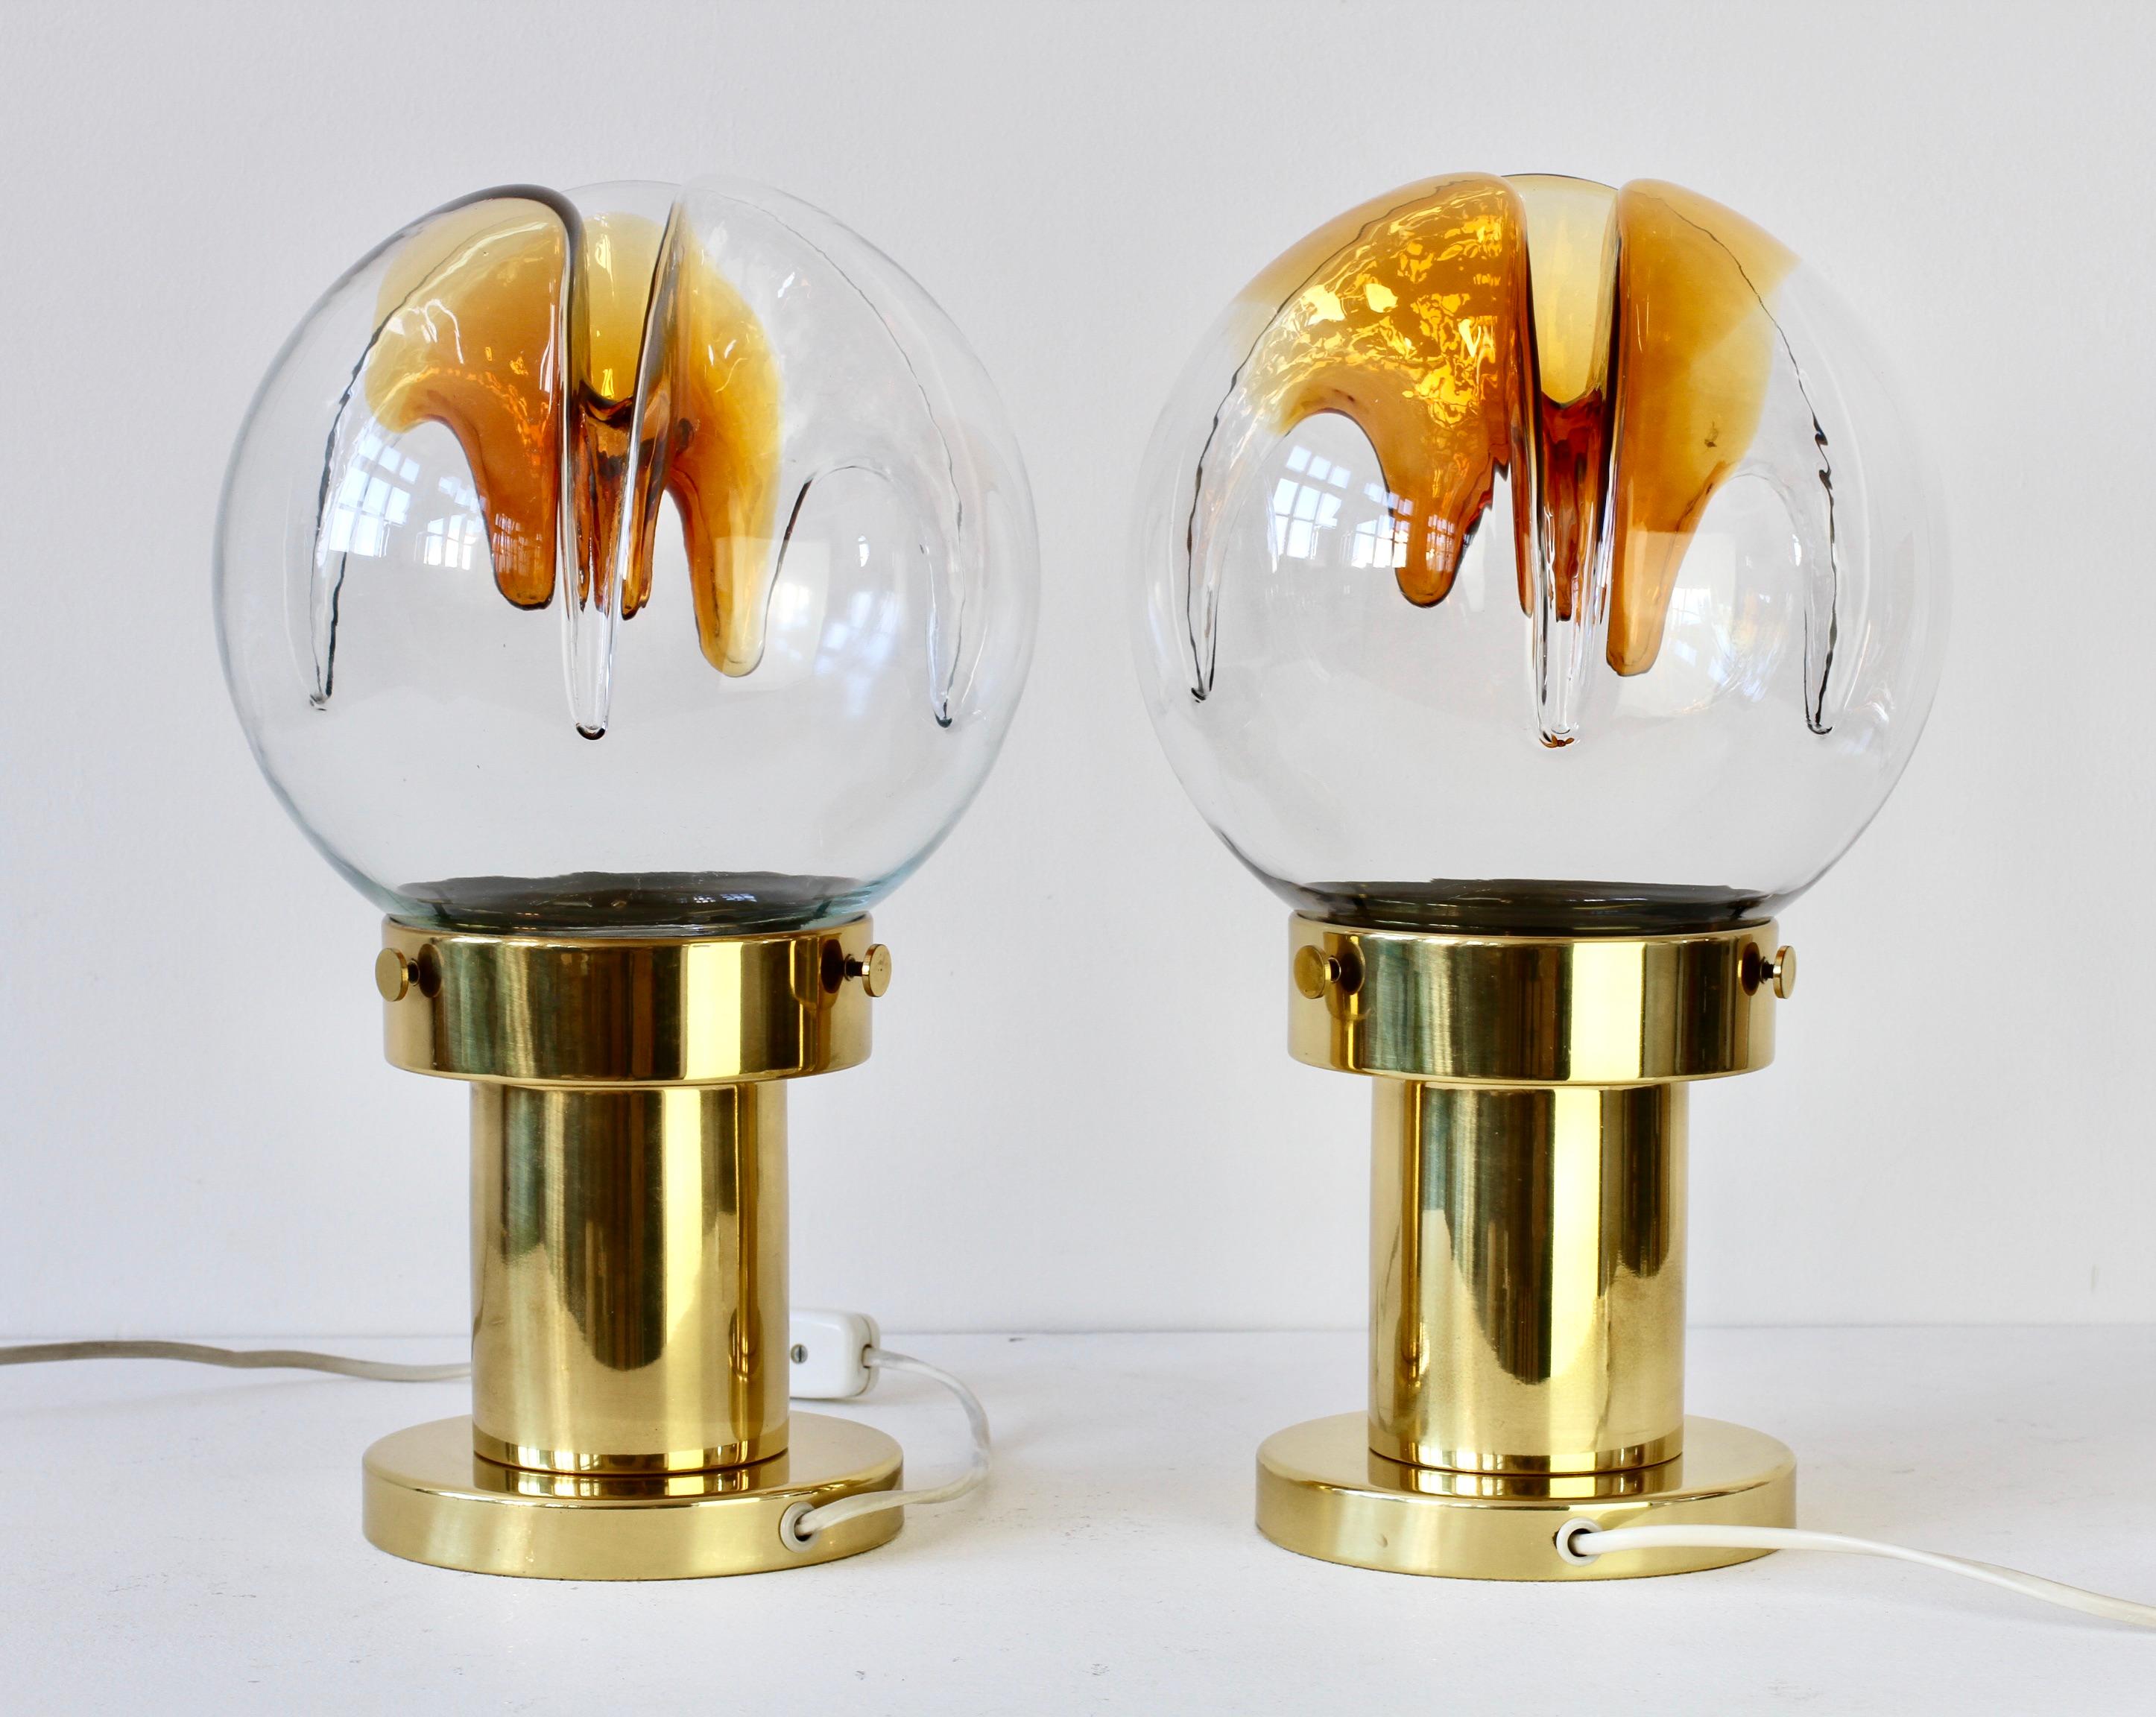 Rare Pair of Large Italian Textured Murano Glass Table Lamps by Kaiser Leuchten For Sale 2